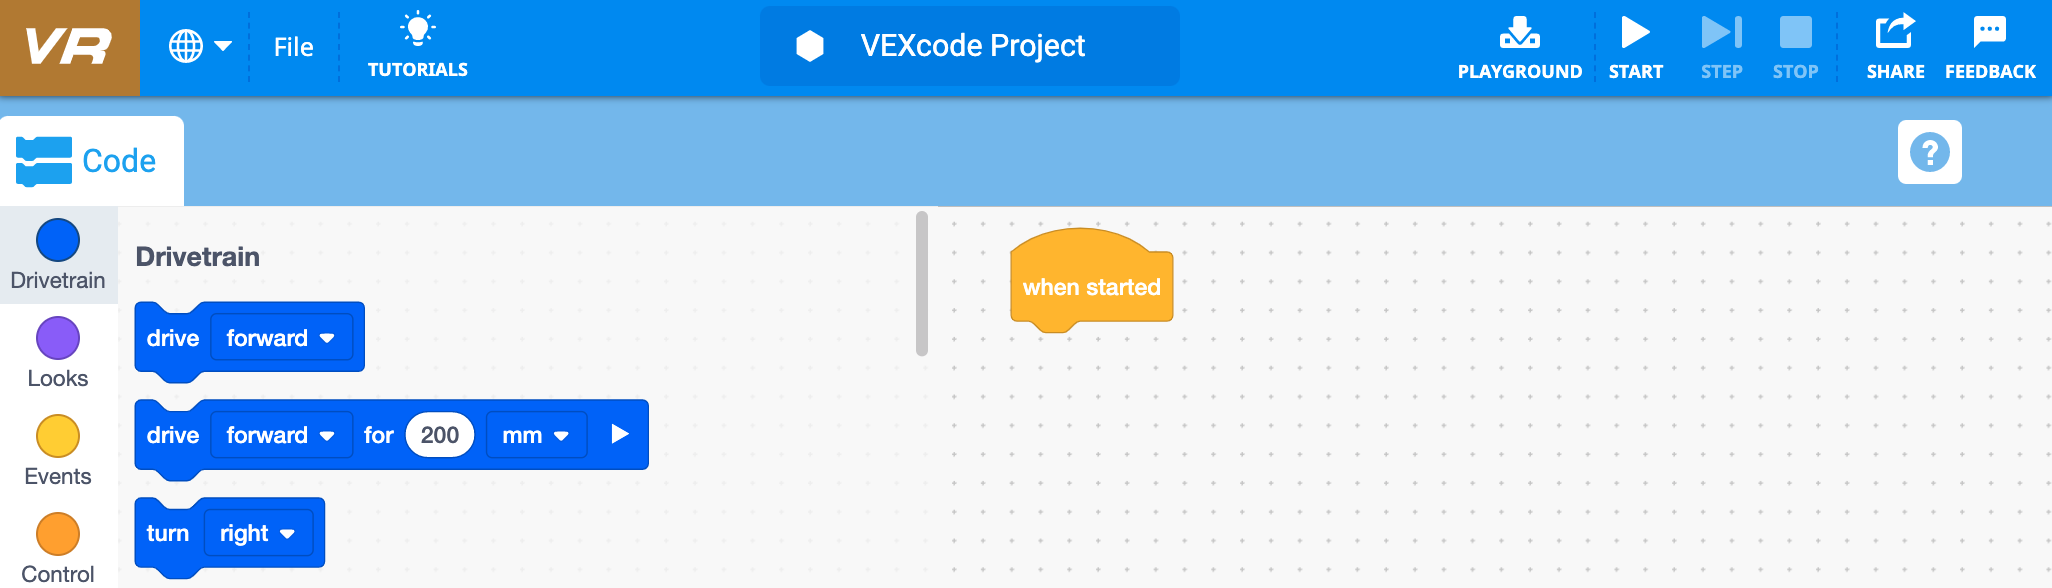 Launch VEXcode VR